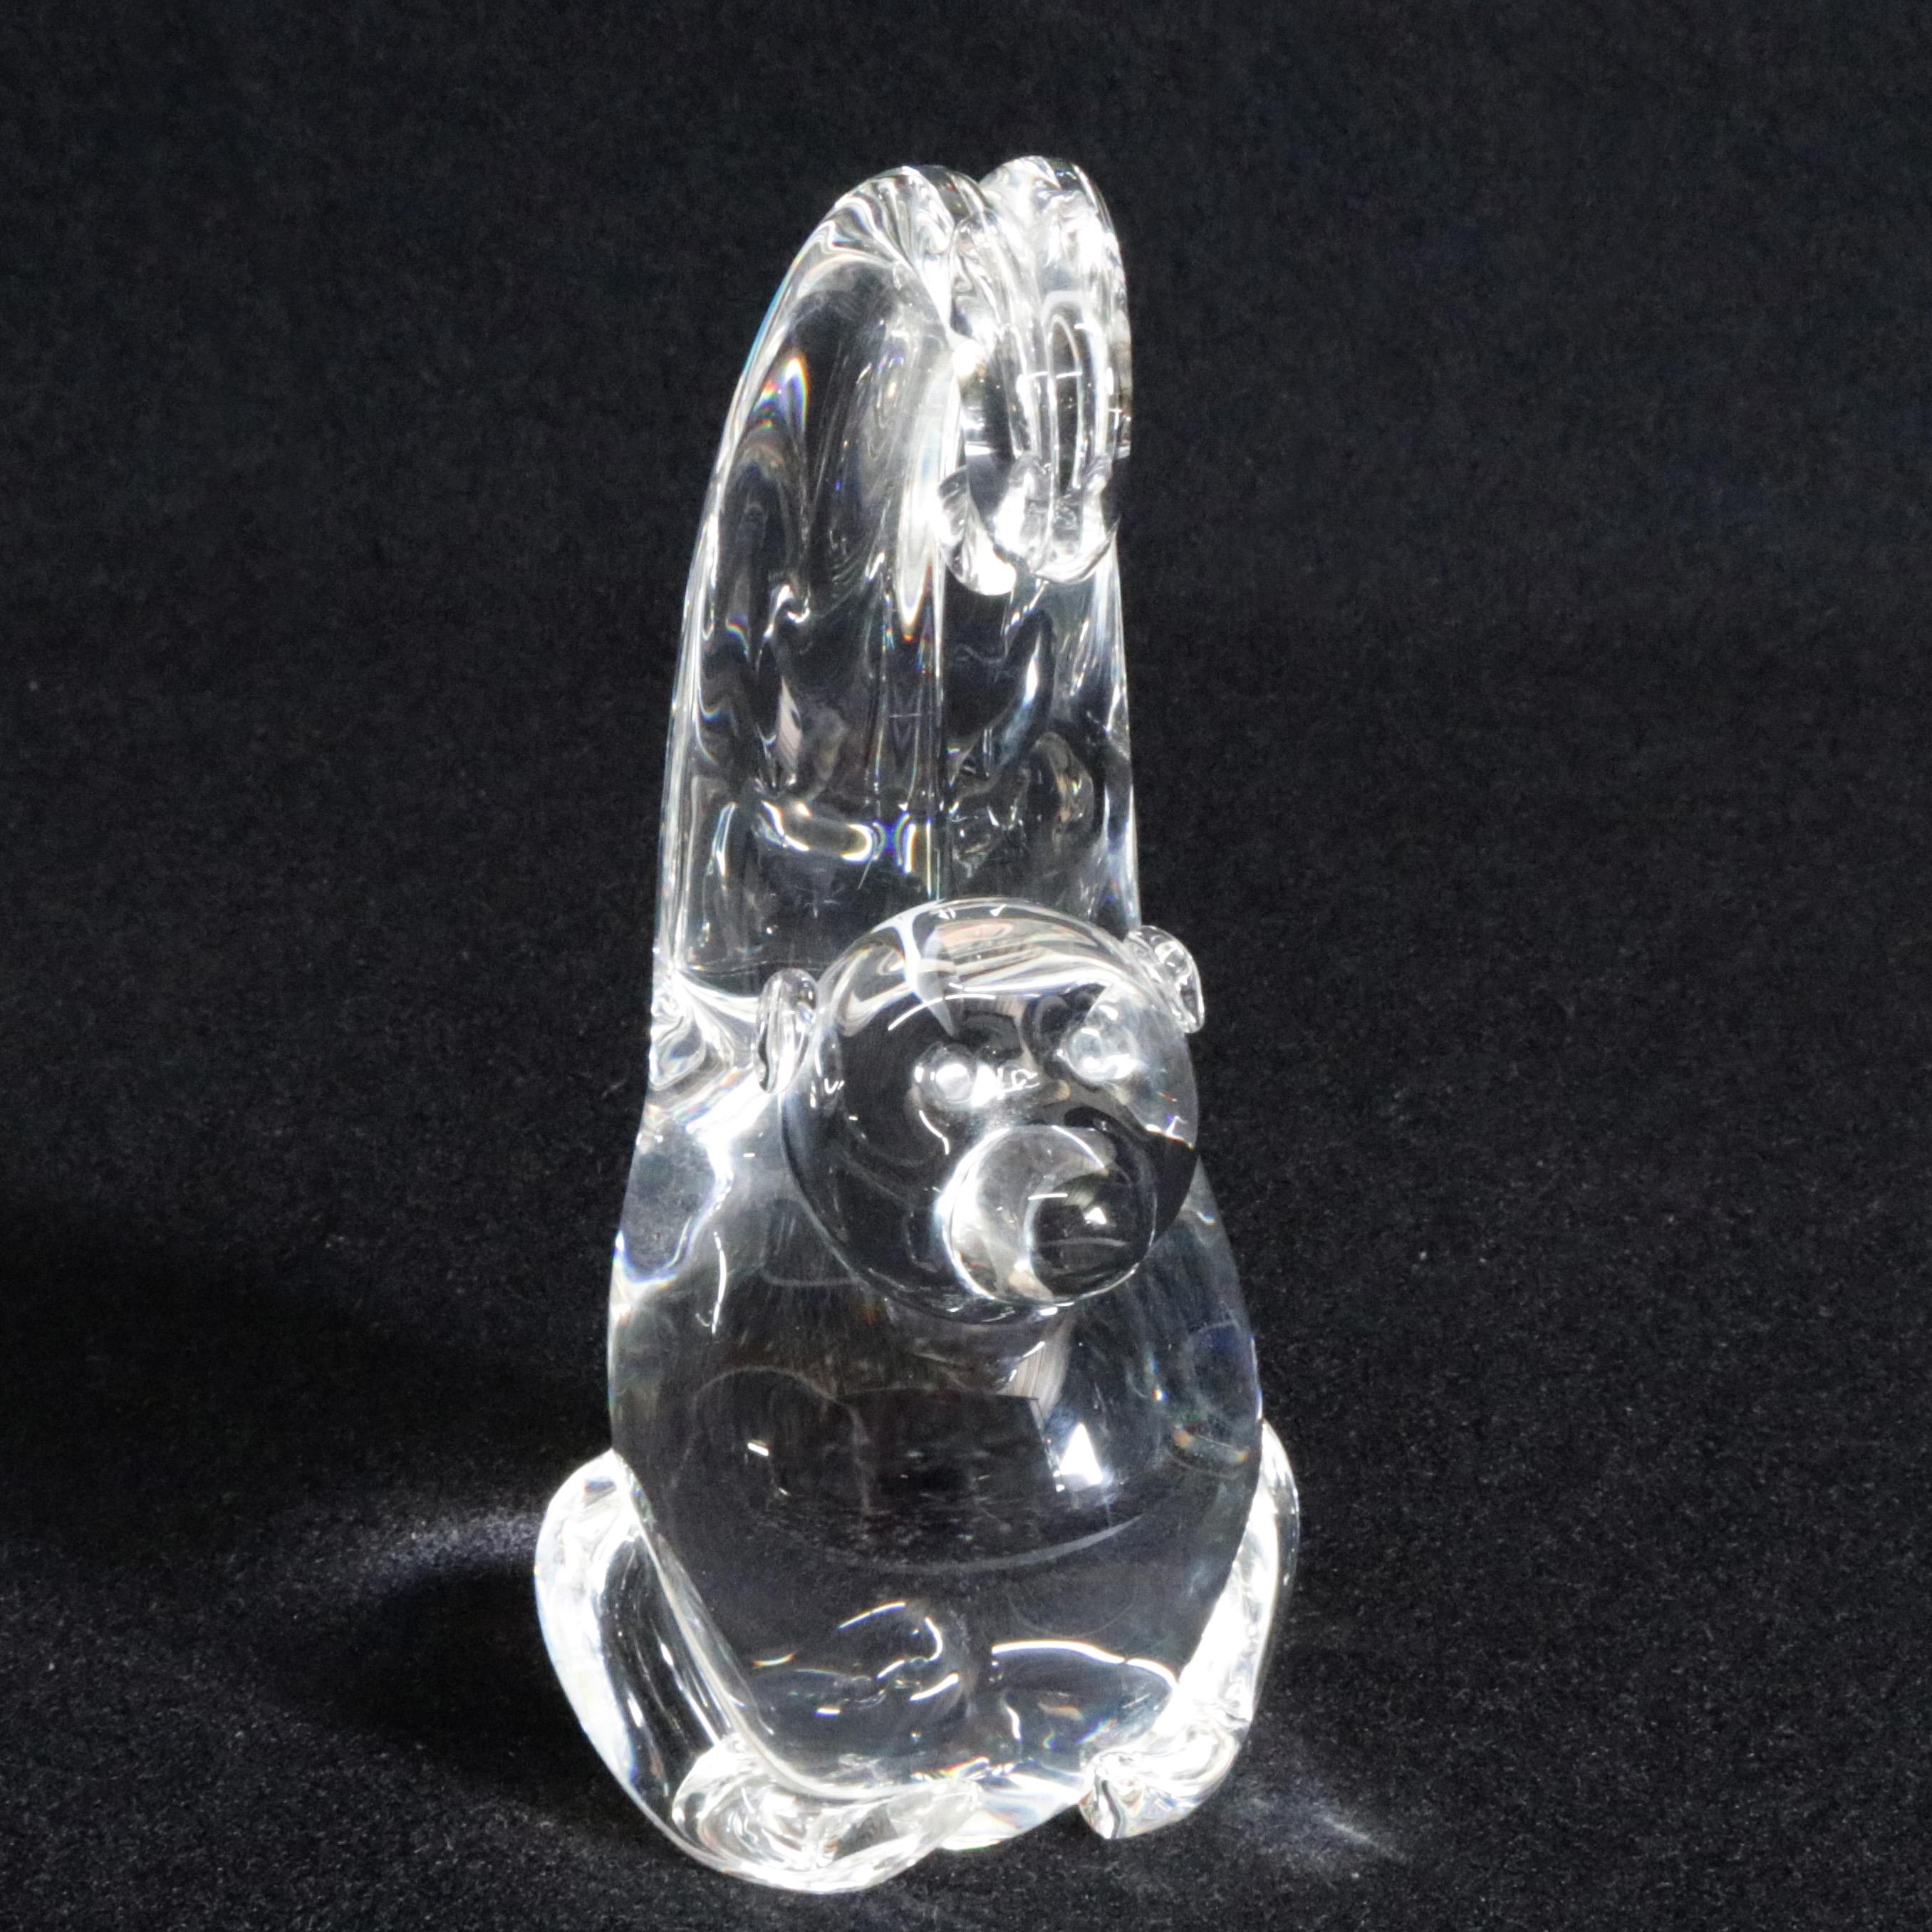 Hand-Crafted Steuben Figurative Crystal Sculpture Monkey Paperweight by de Sousa, Signed